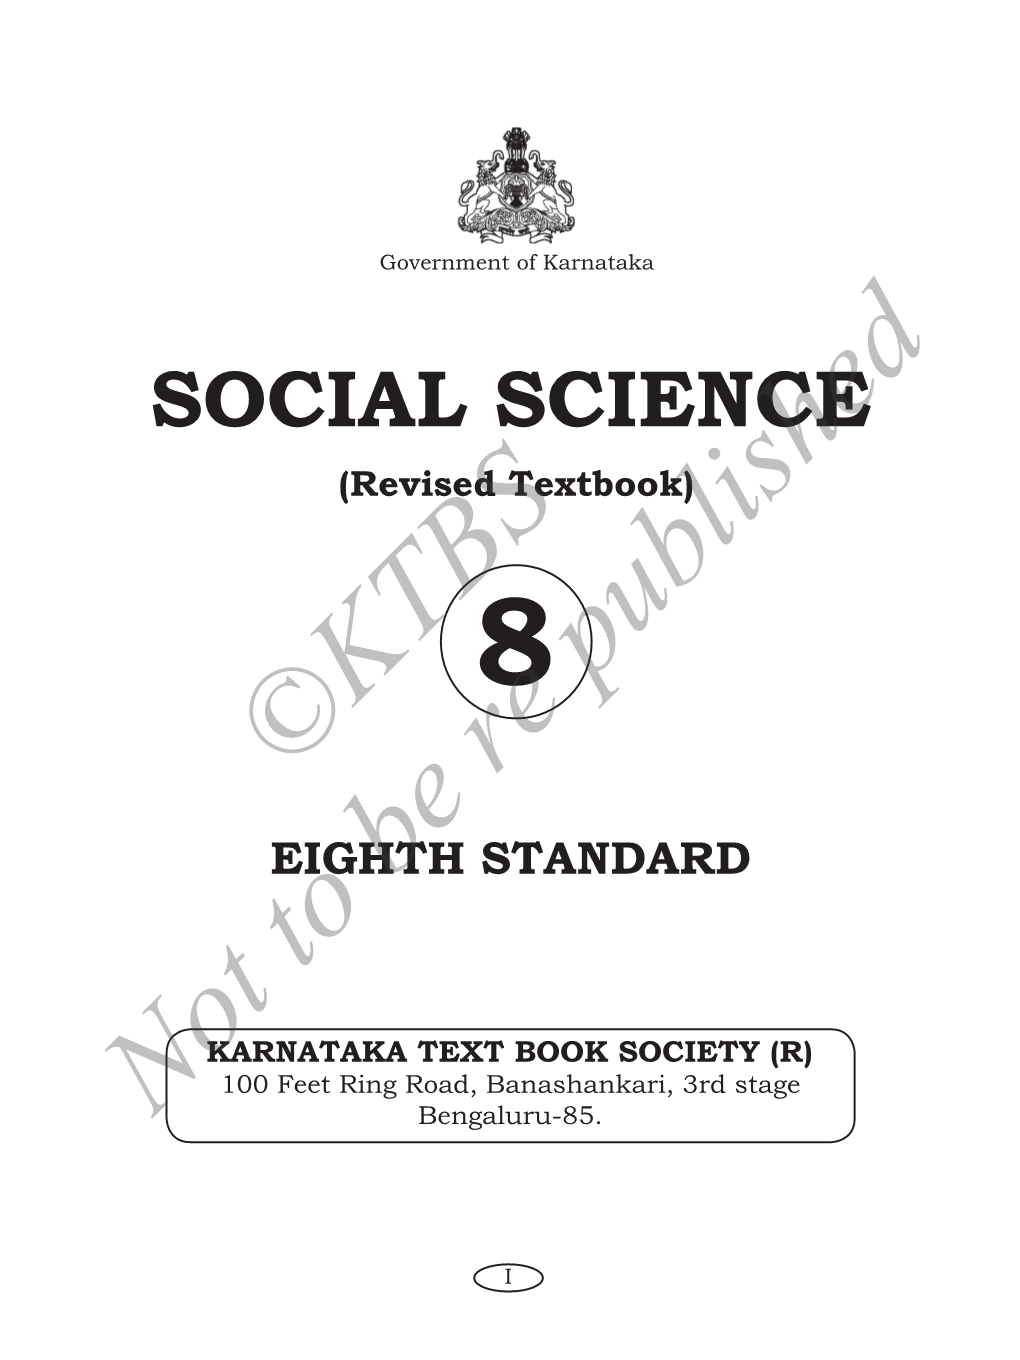 SOCIAL SCIENCE (Revised Textbook)